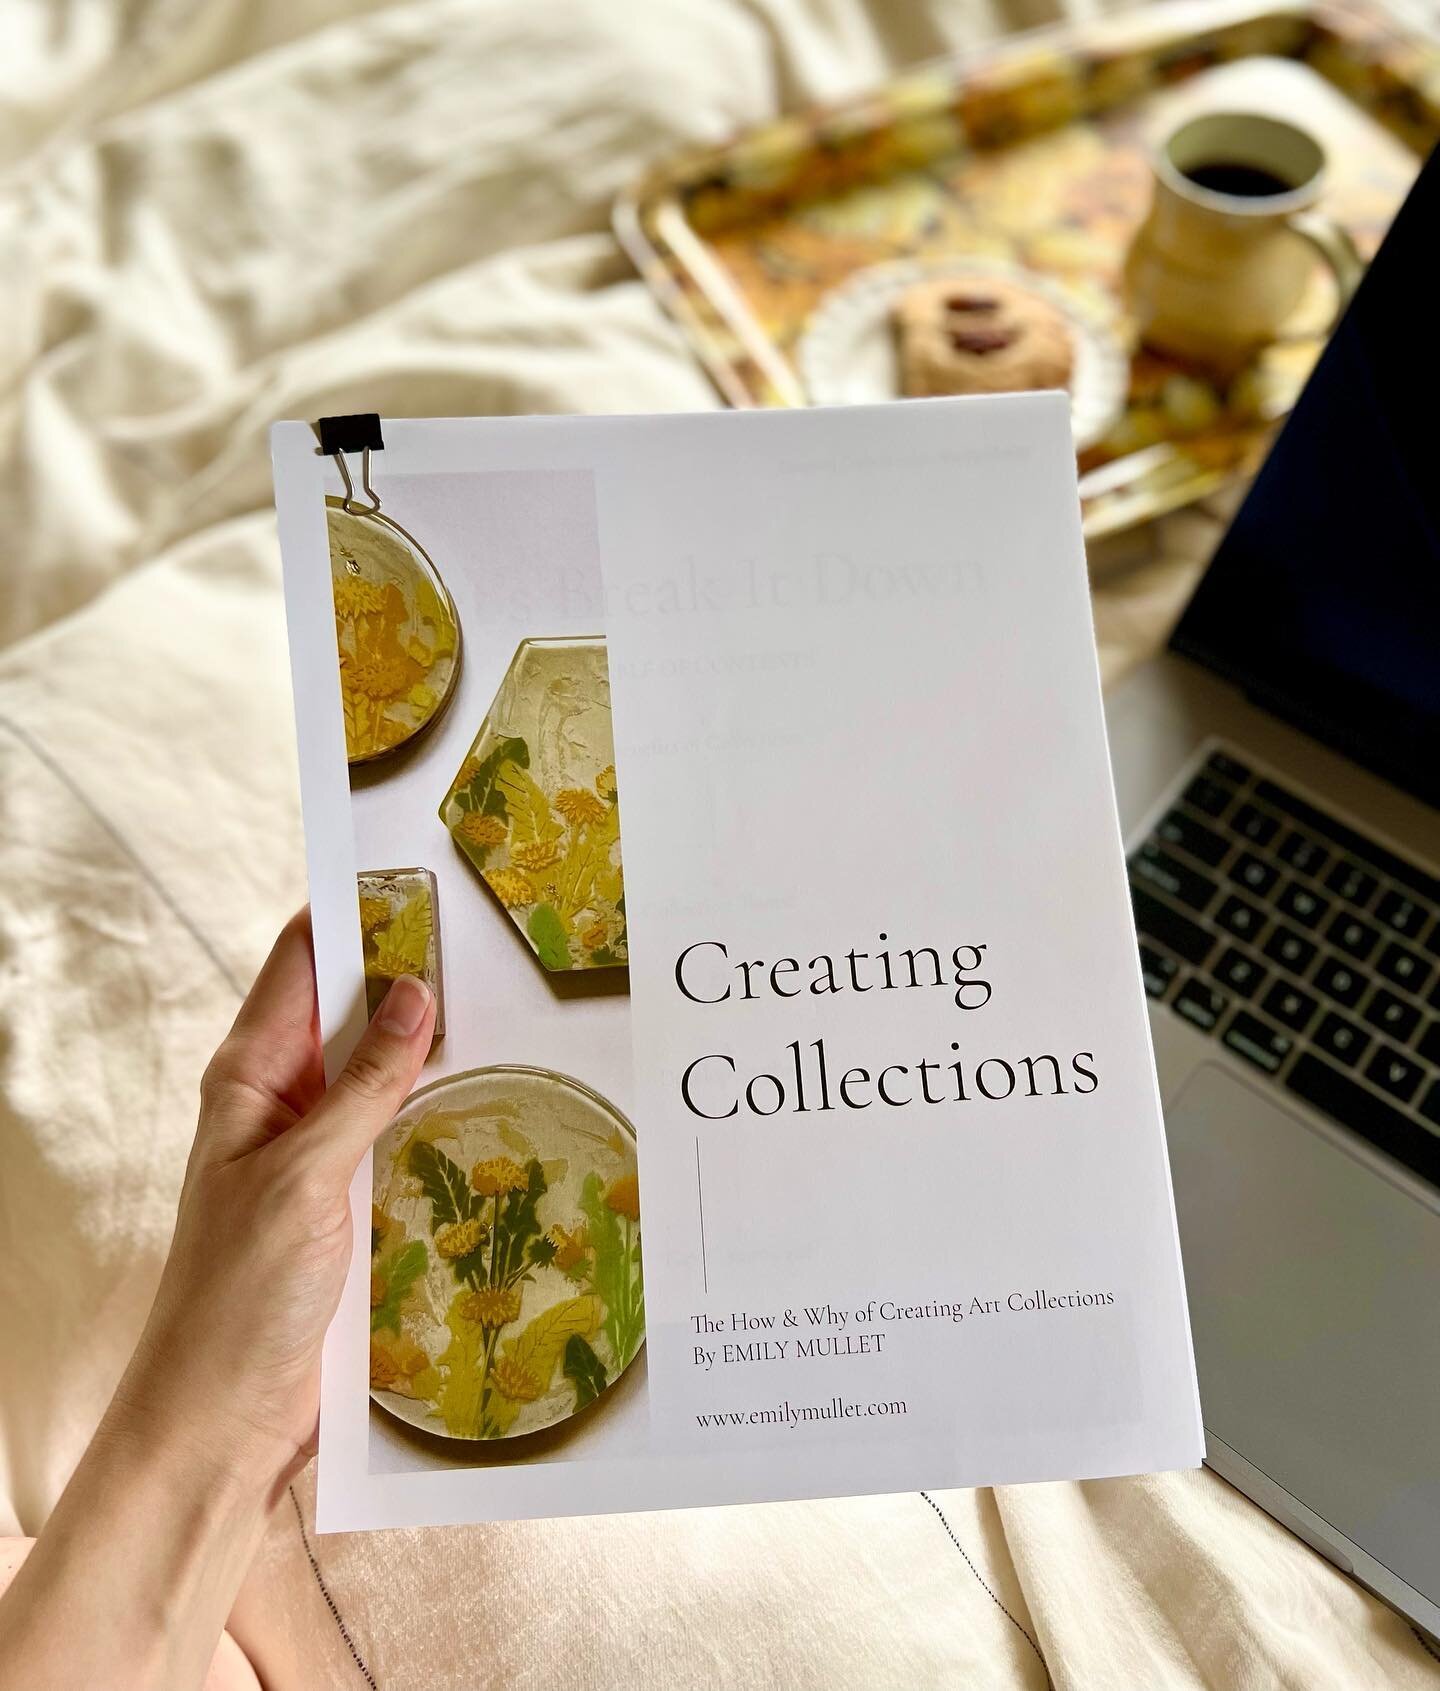 LAST CALL! It is the very last day to enroll in my online course, Creating Collections! The first video drops on Monday! I am so thankful and excited for the people who have already signed up. I can&rsquo;t wait to see how this course impacts their a